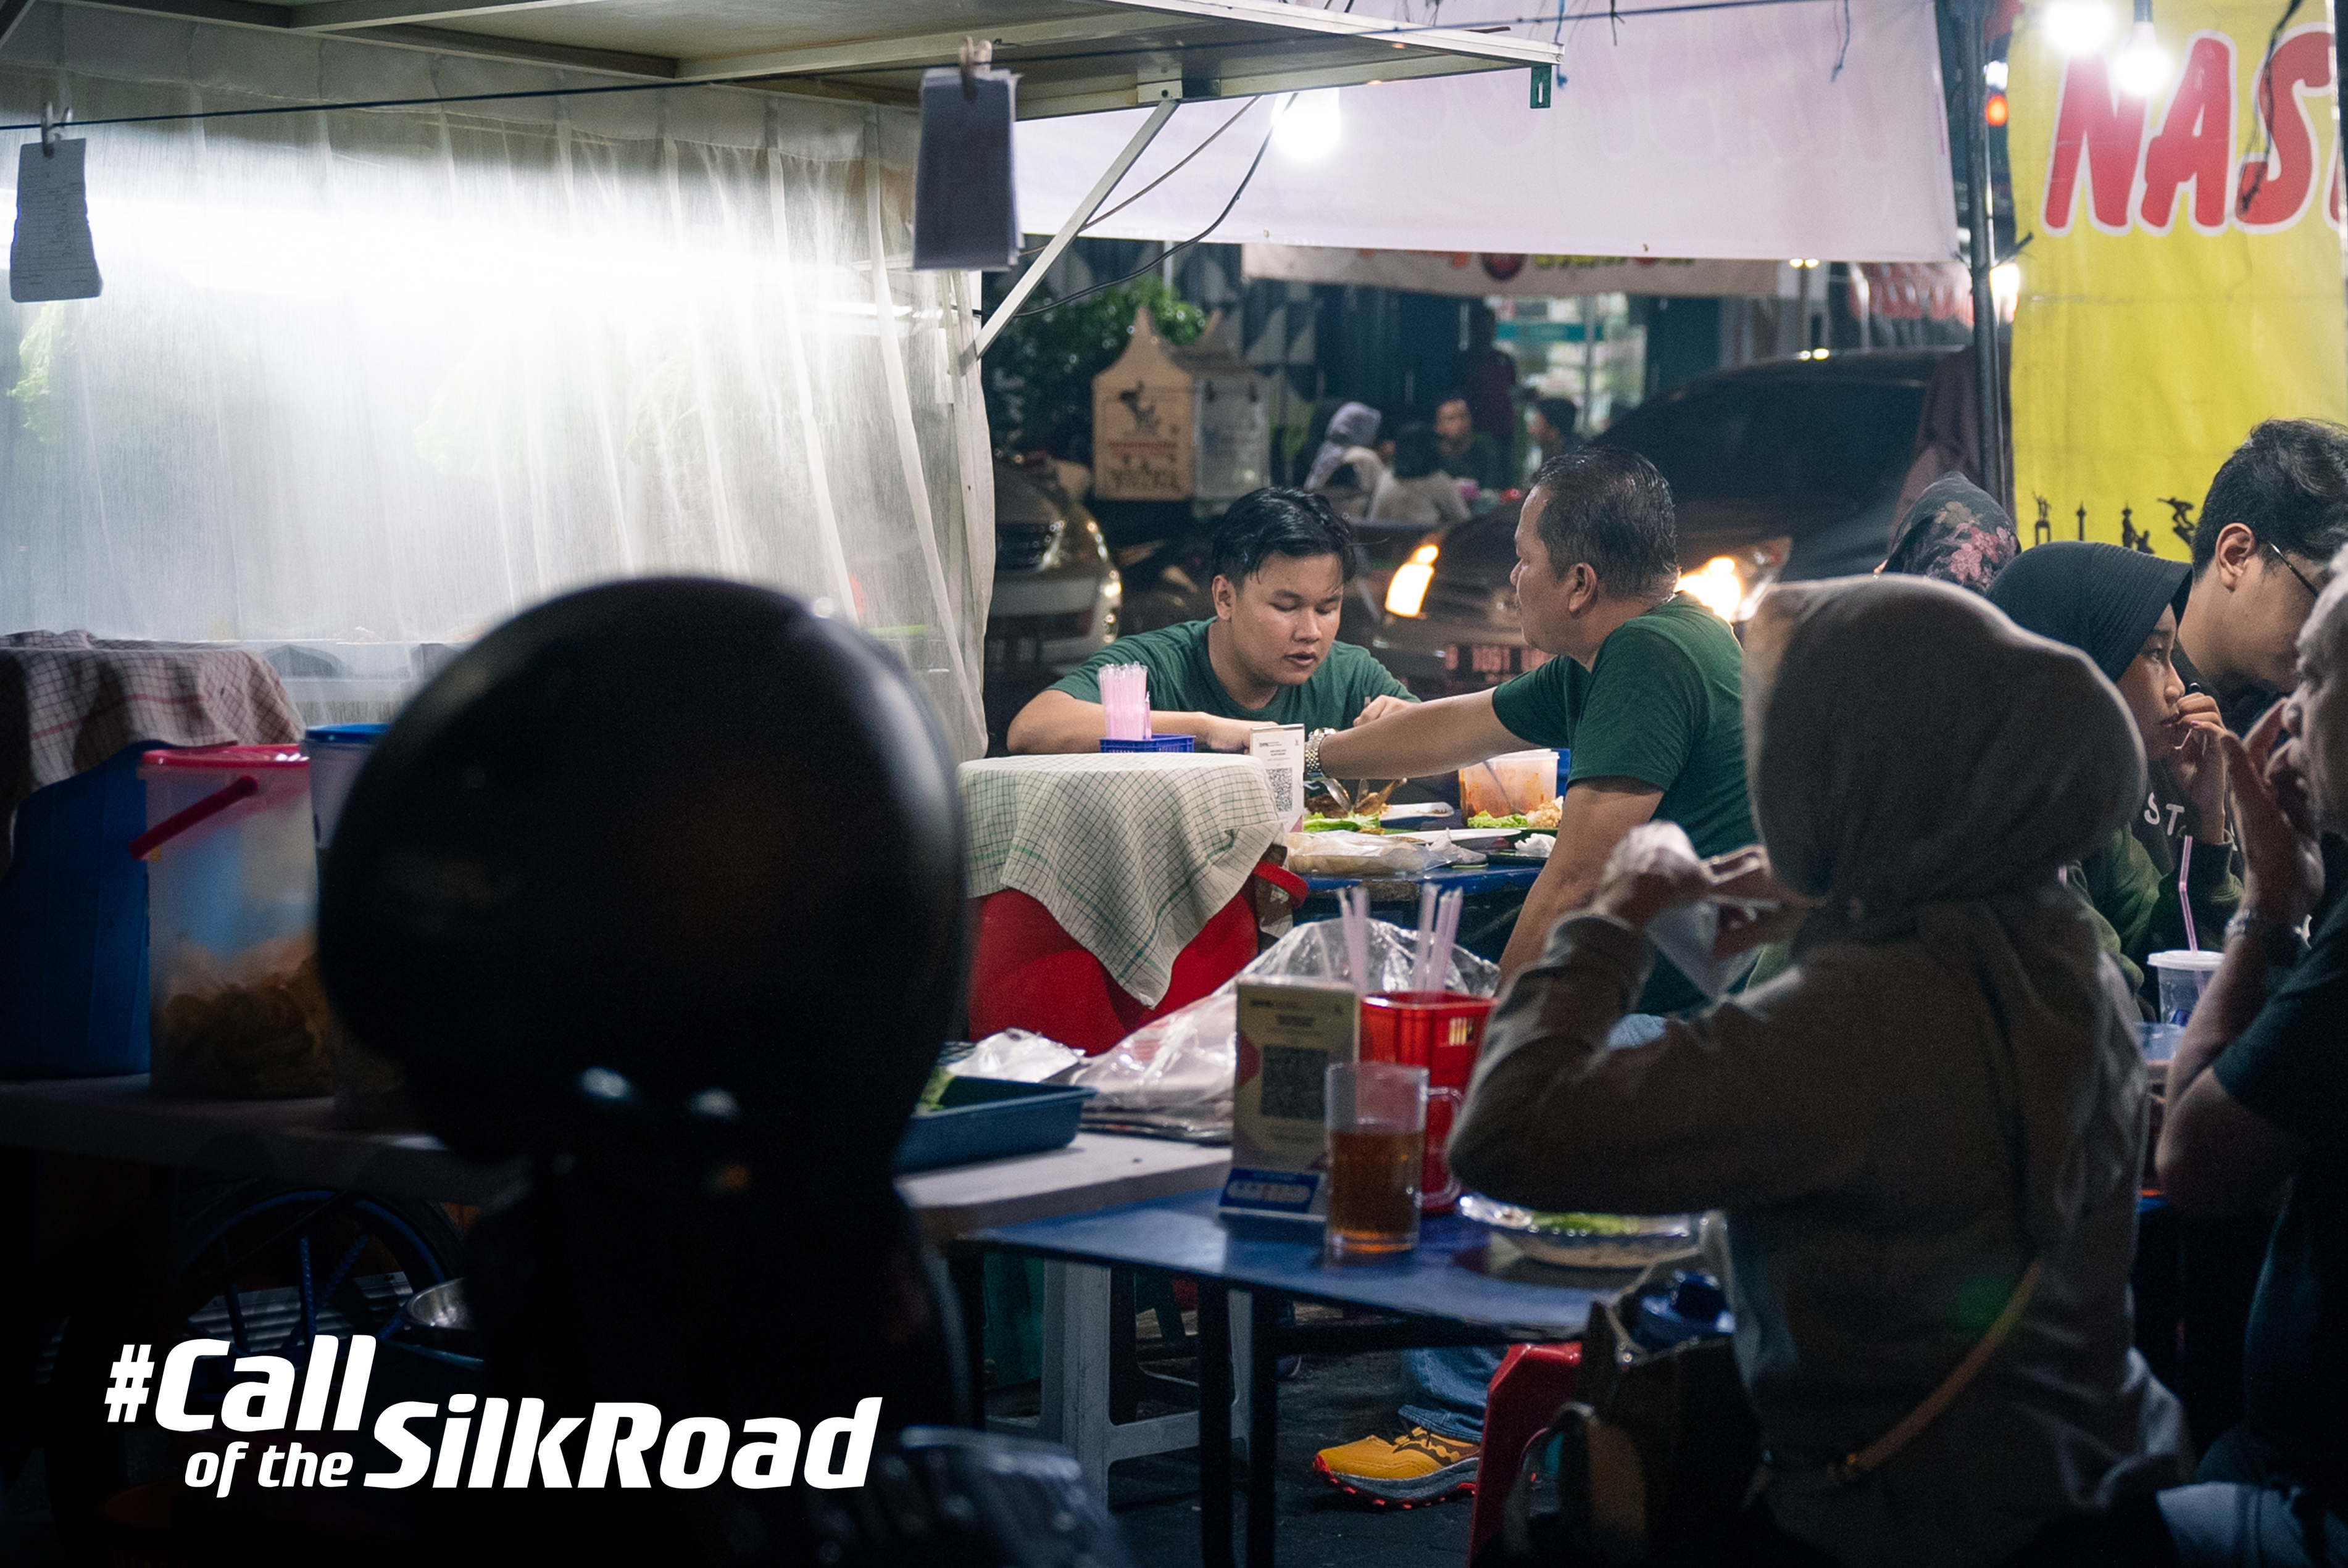 Incredible Indonesia: Call of the Silk Road is heading south